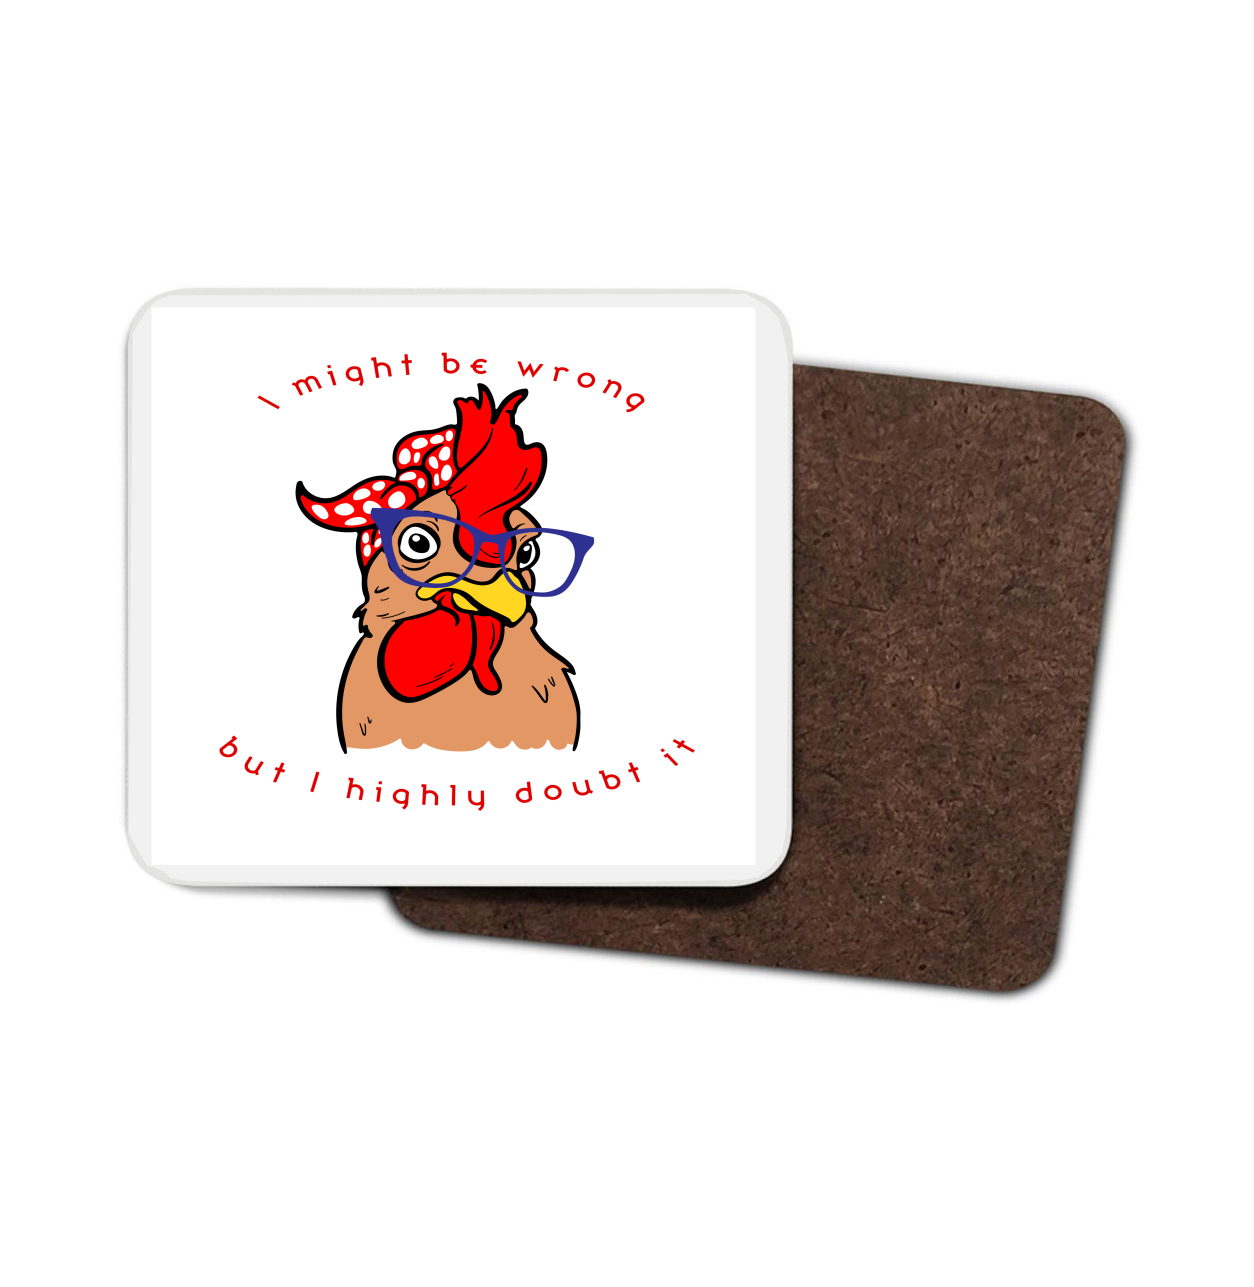 Chicken Hardboard Coaster - I may be wrong but I highly doubt it